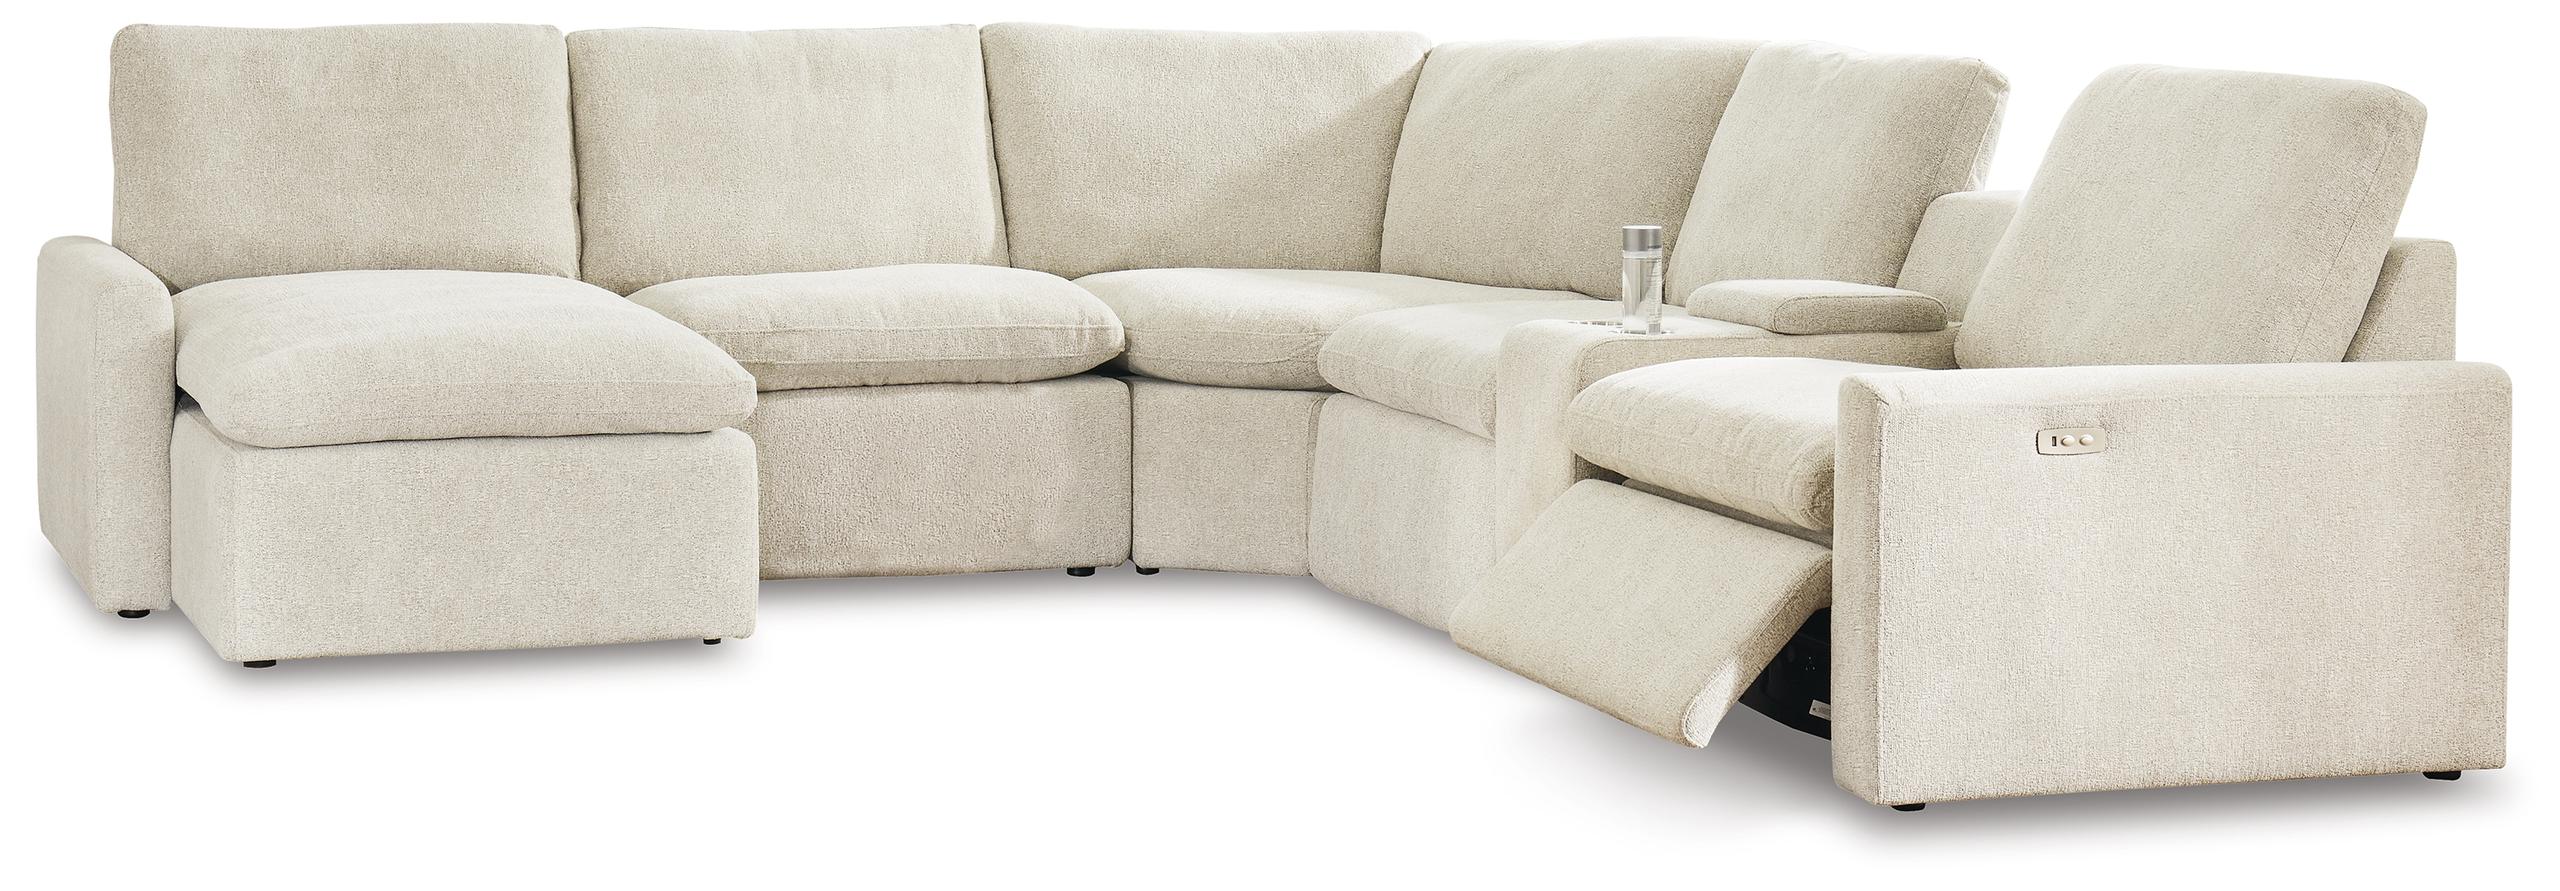 ASHLEY FURNITURE 60509S7 Hartsdale 6-piece Left Arm Facing Reclining Sectional With Console and Chaise